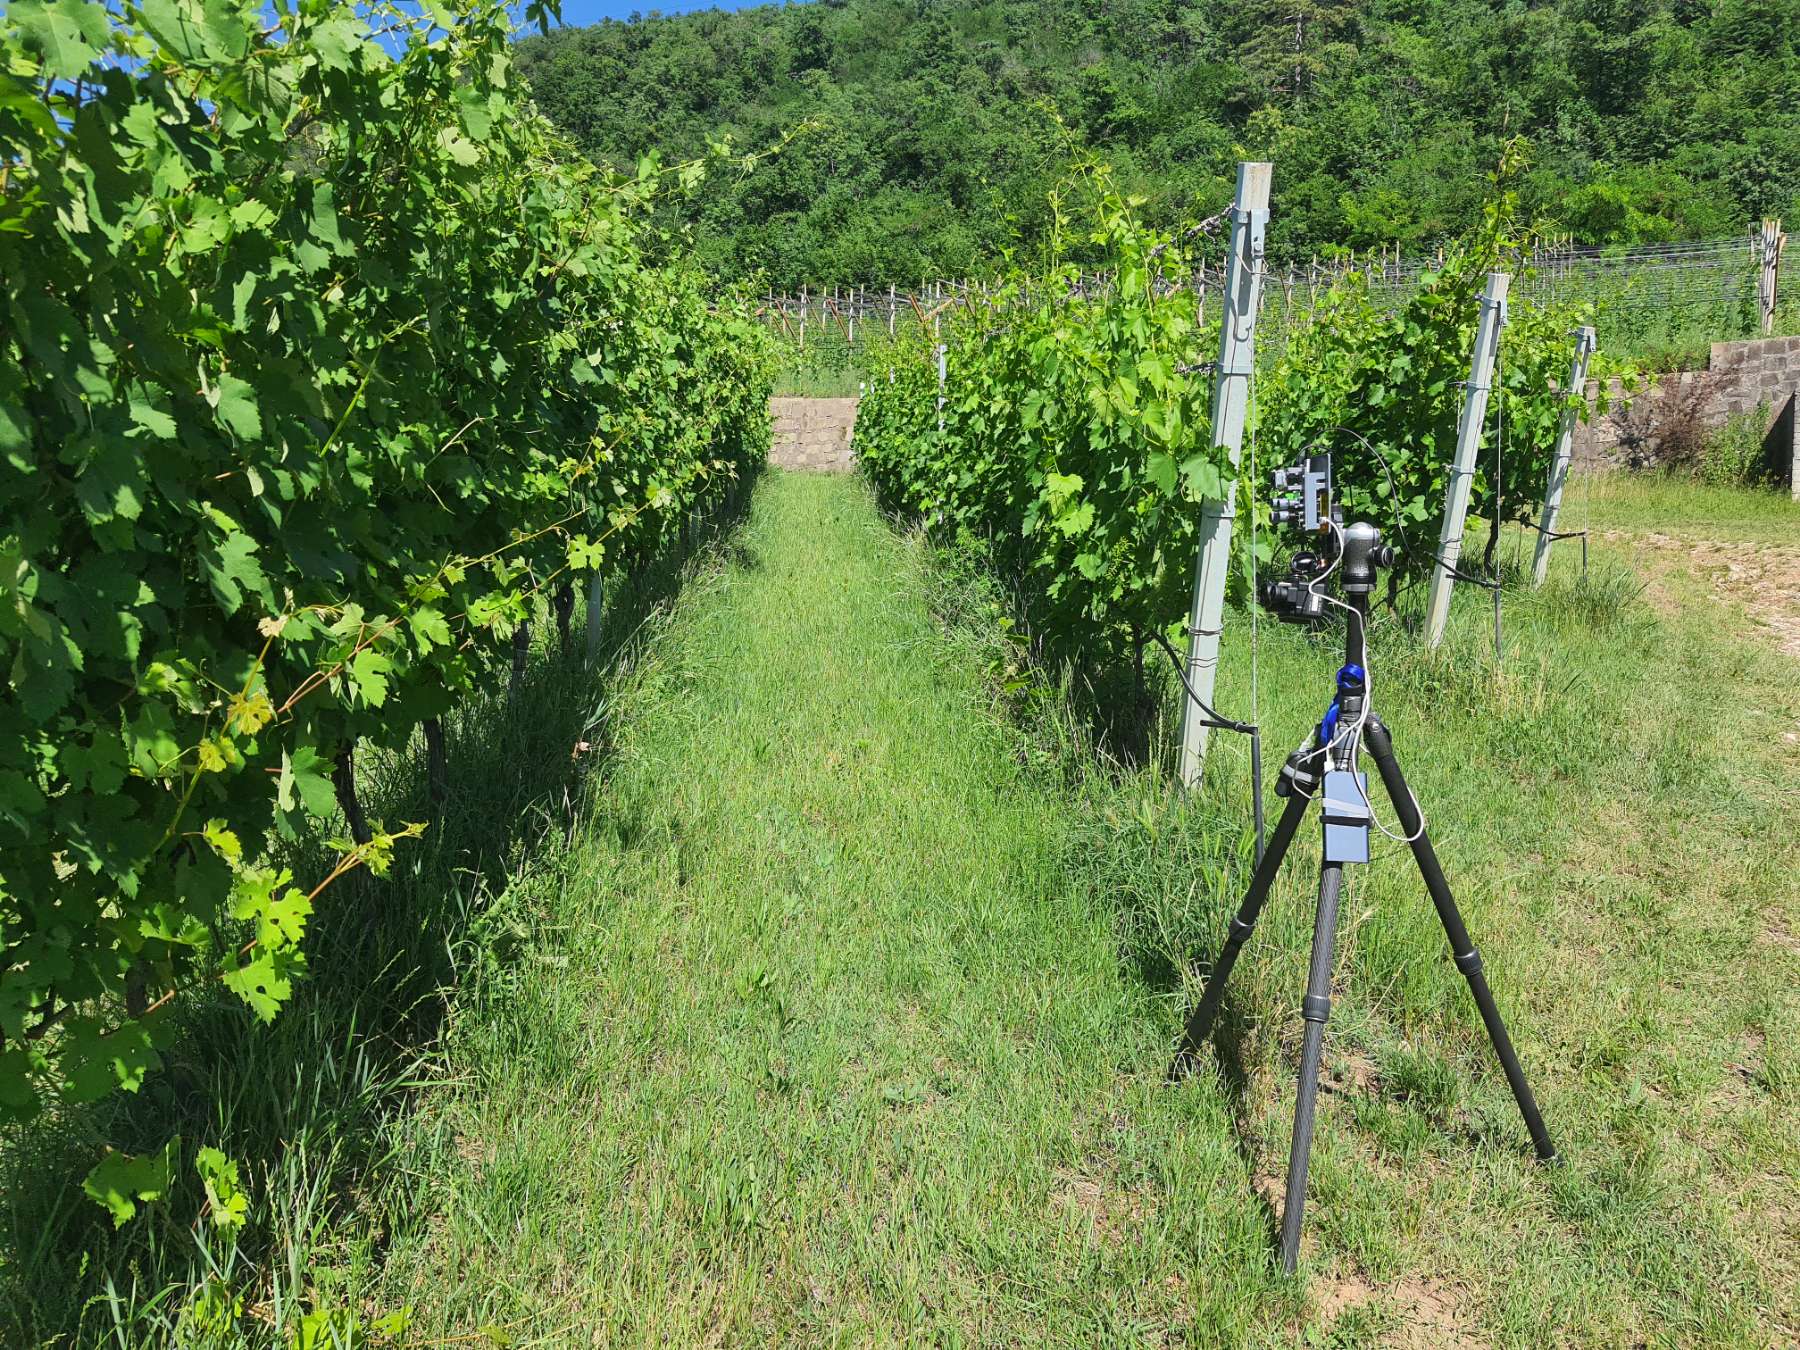 MCAPEFA camera (Multispectral and thermal, prototype II) and FLIR as thermal reference.